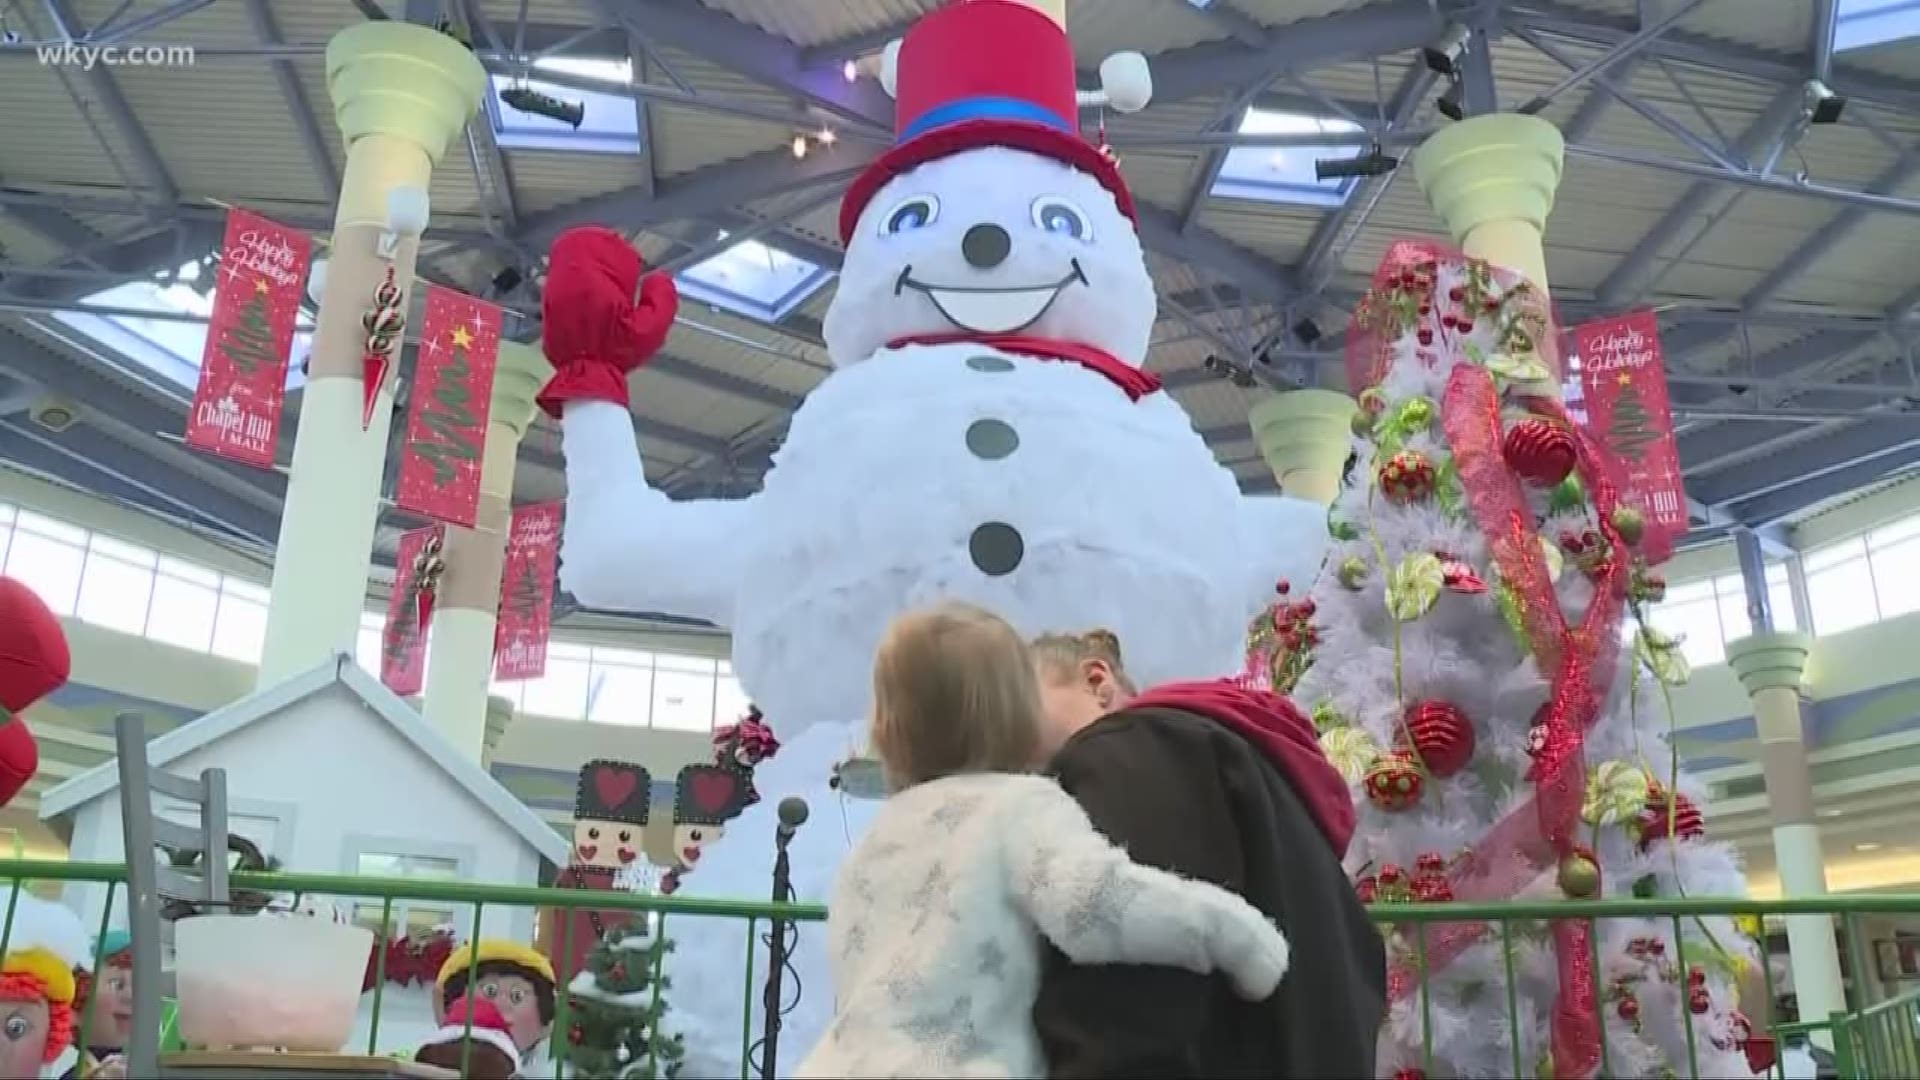 Archie the snowman returns to Chapel Hill mall